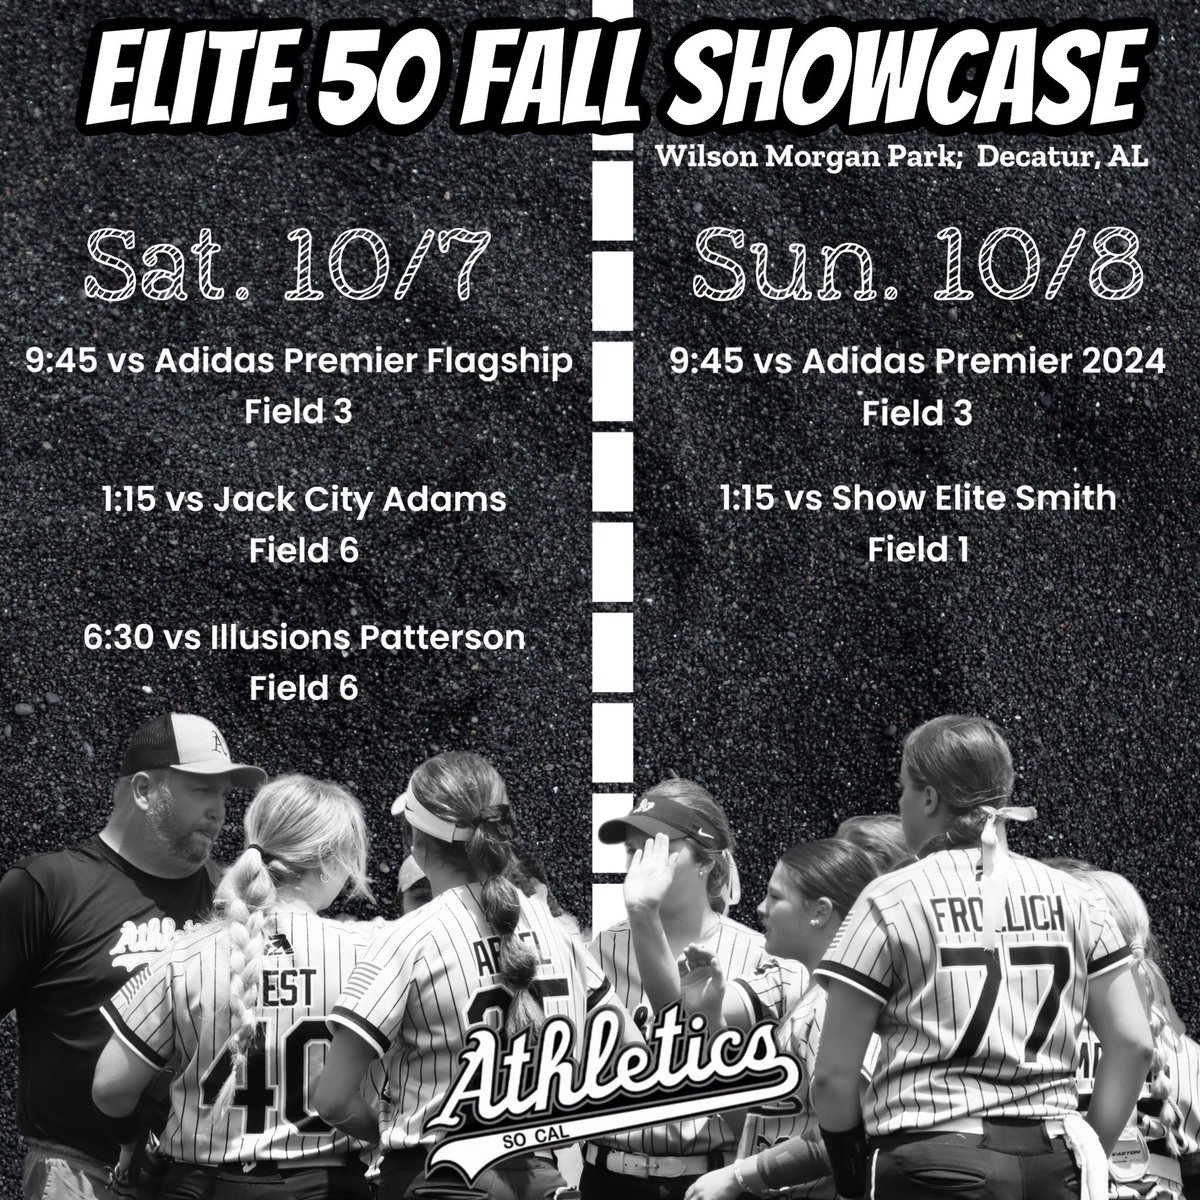 Our athletes are traveling to North Alabama this weekend to kick off our fall showcase schedule. Looking forward to getting back out on the field together to compete! 🖤🥎🩶🥎